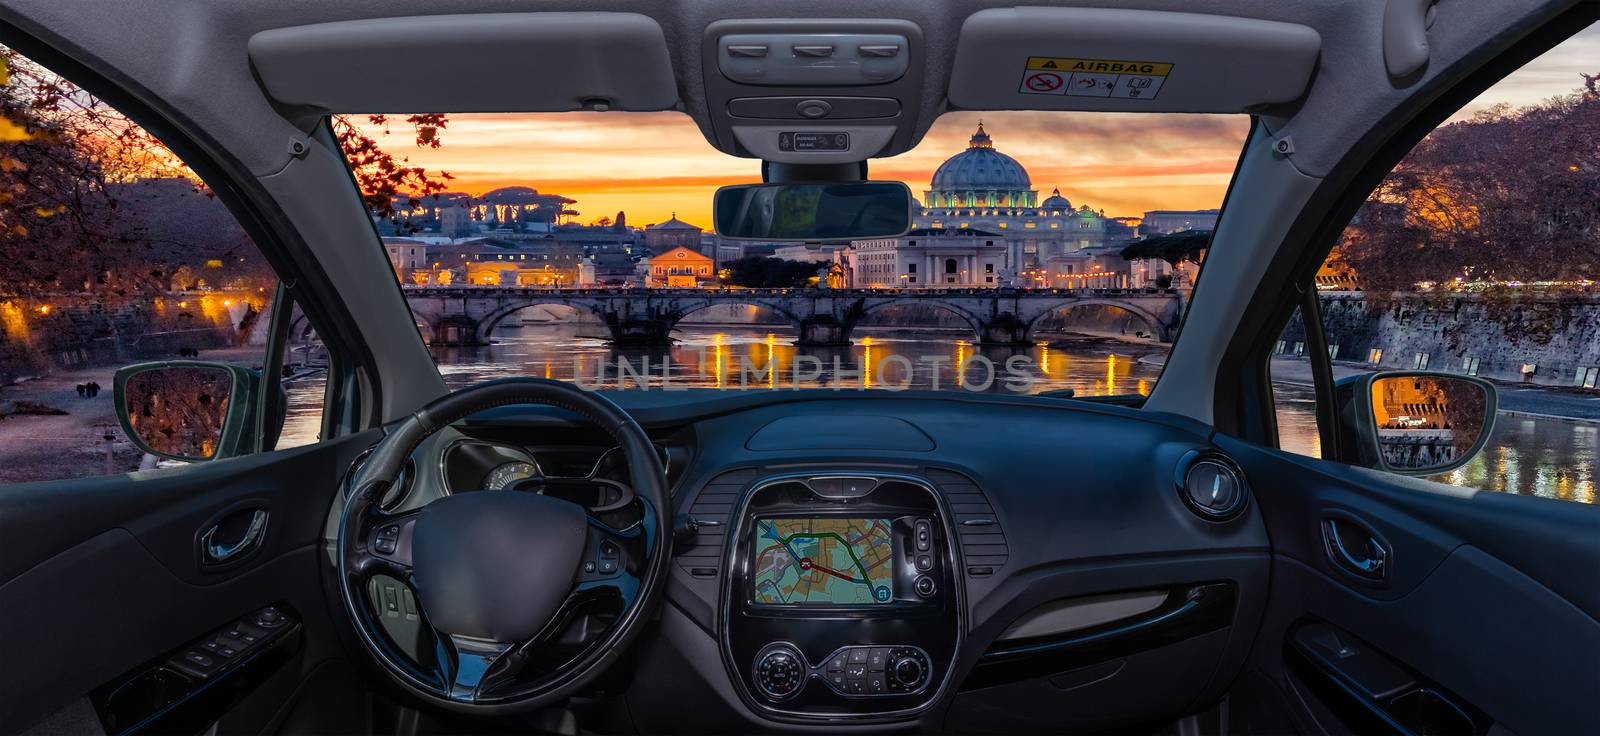 Looking through a car windshield with view over Saint Peter's Church during a wonderful sunset in Rome, Italy